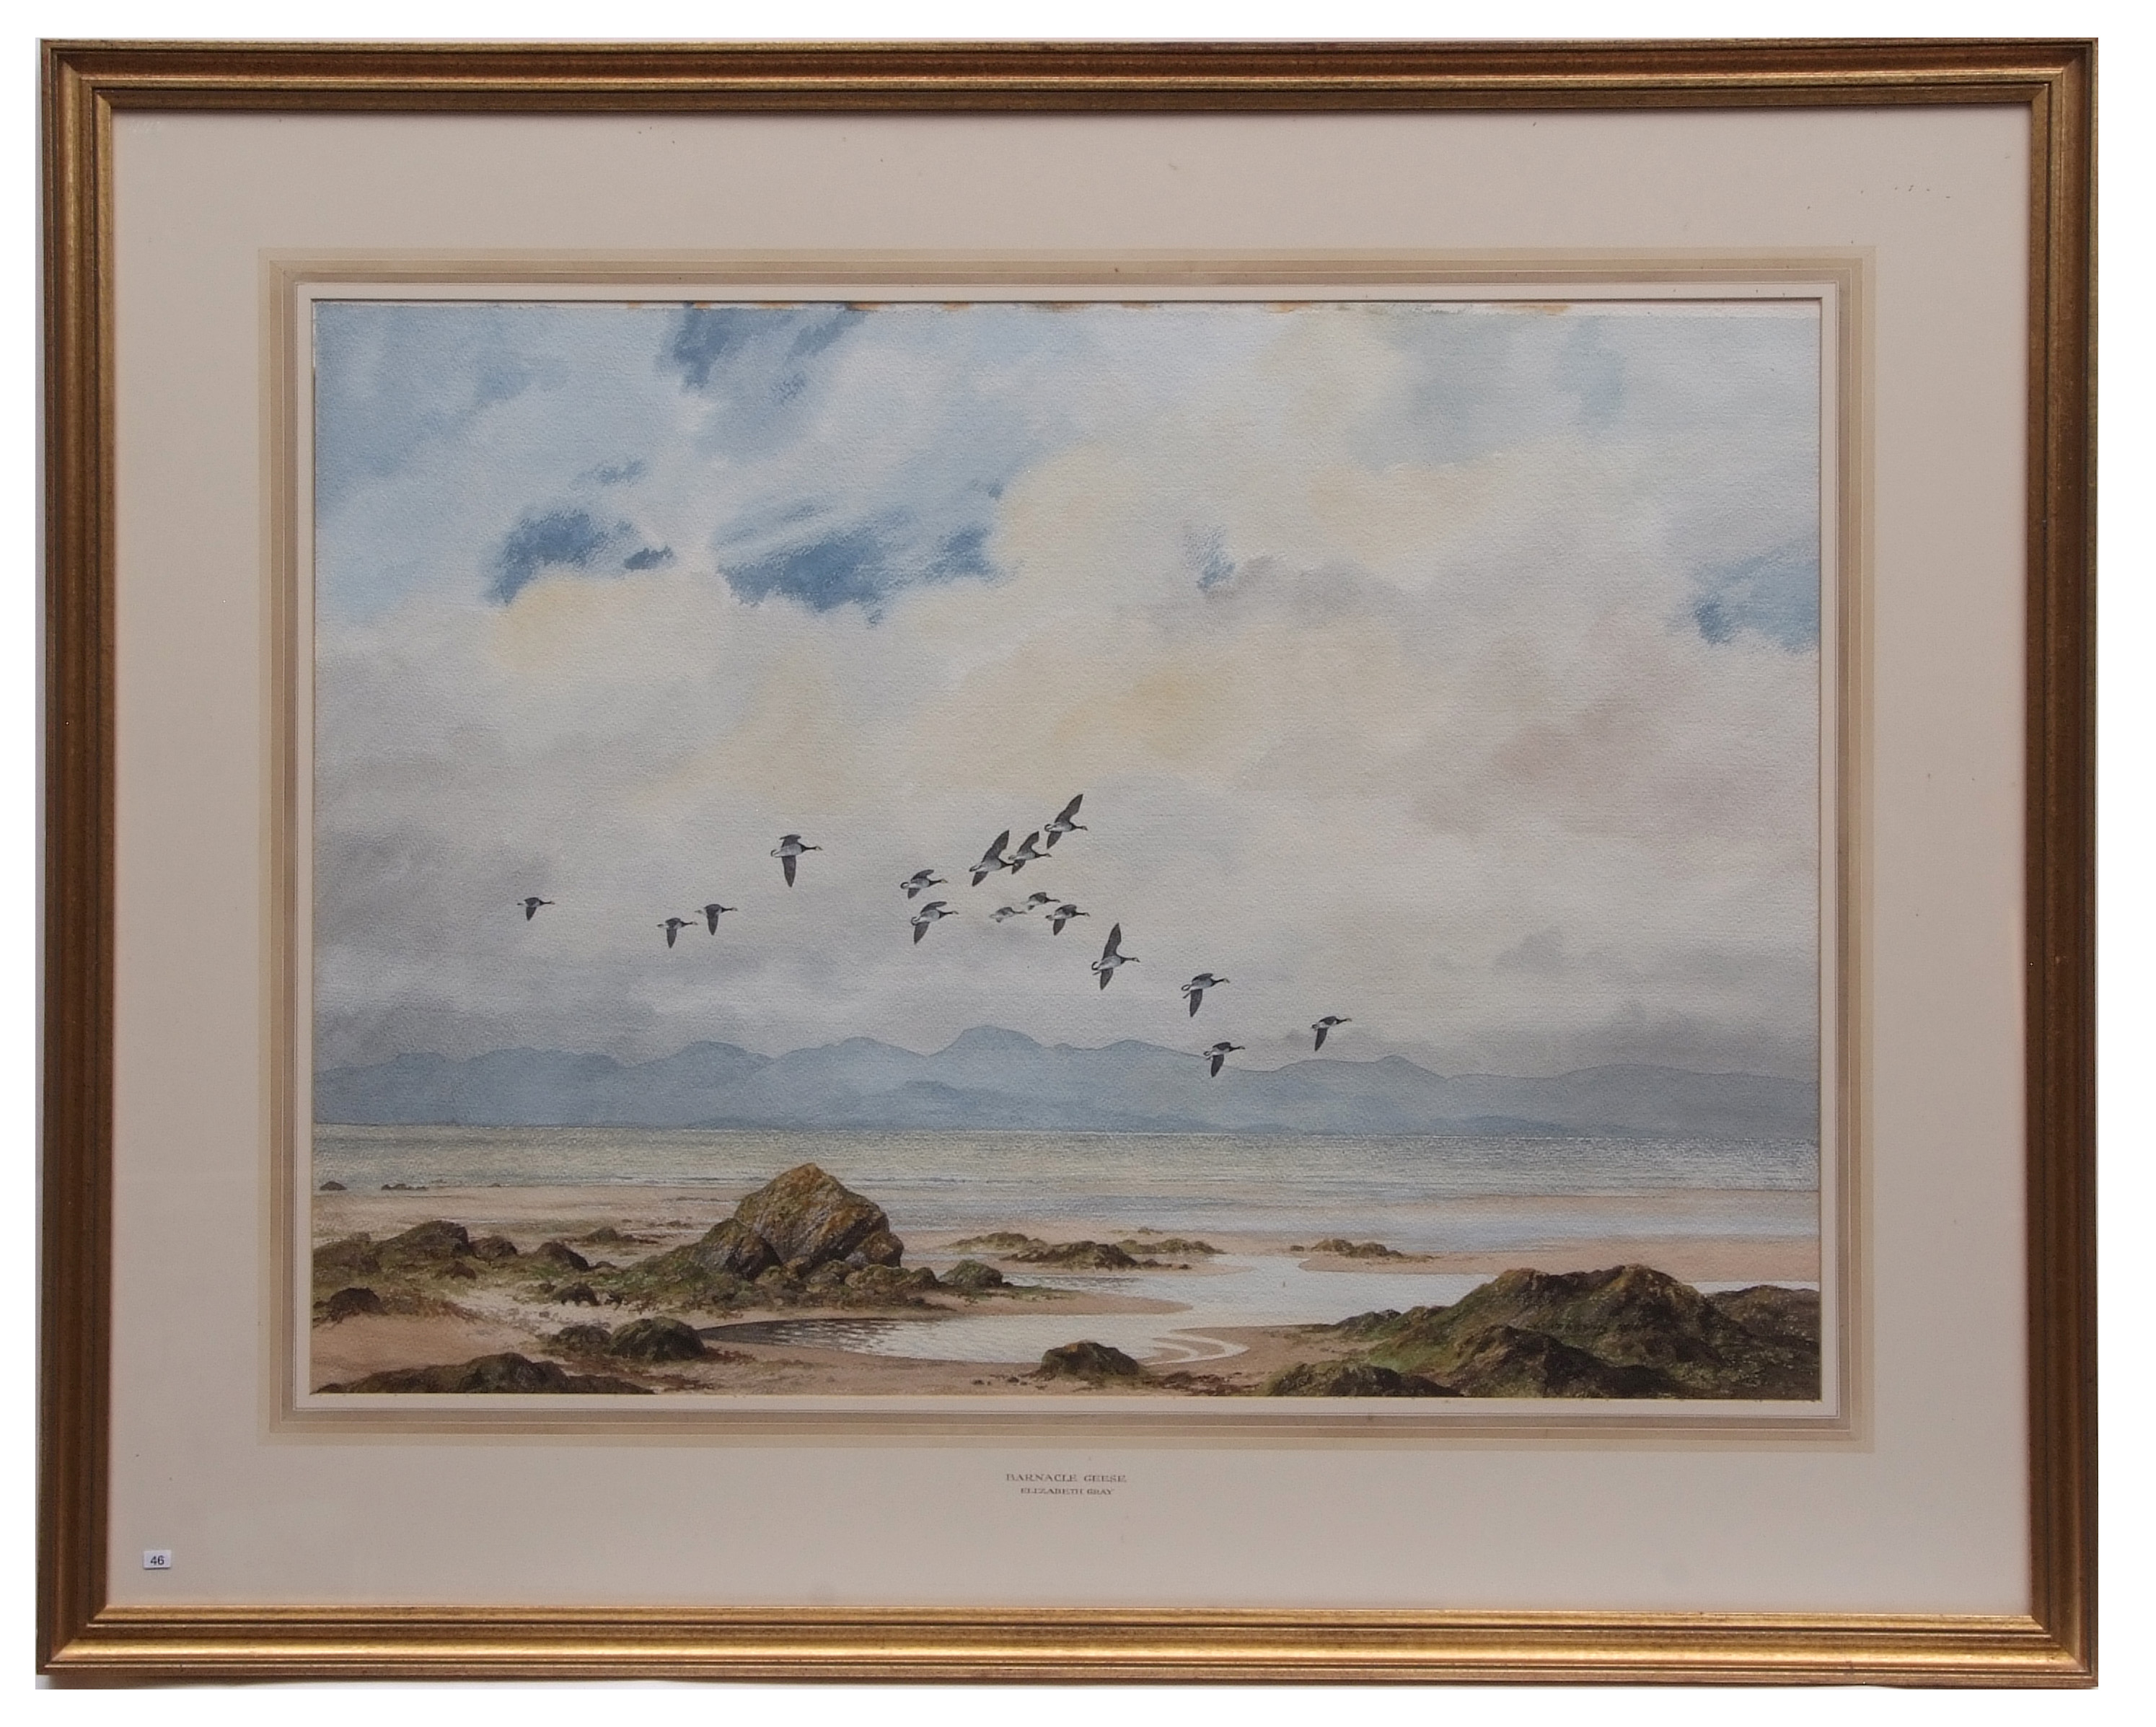 *Elizabeth Gray (20th Century, British) "Barnacle Geese" watercolour, signed lower right 21 x 29ins